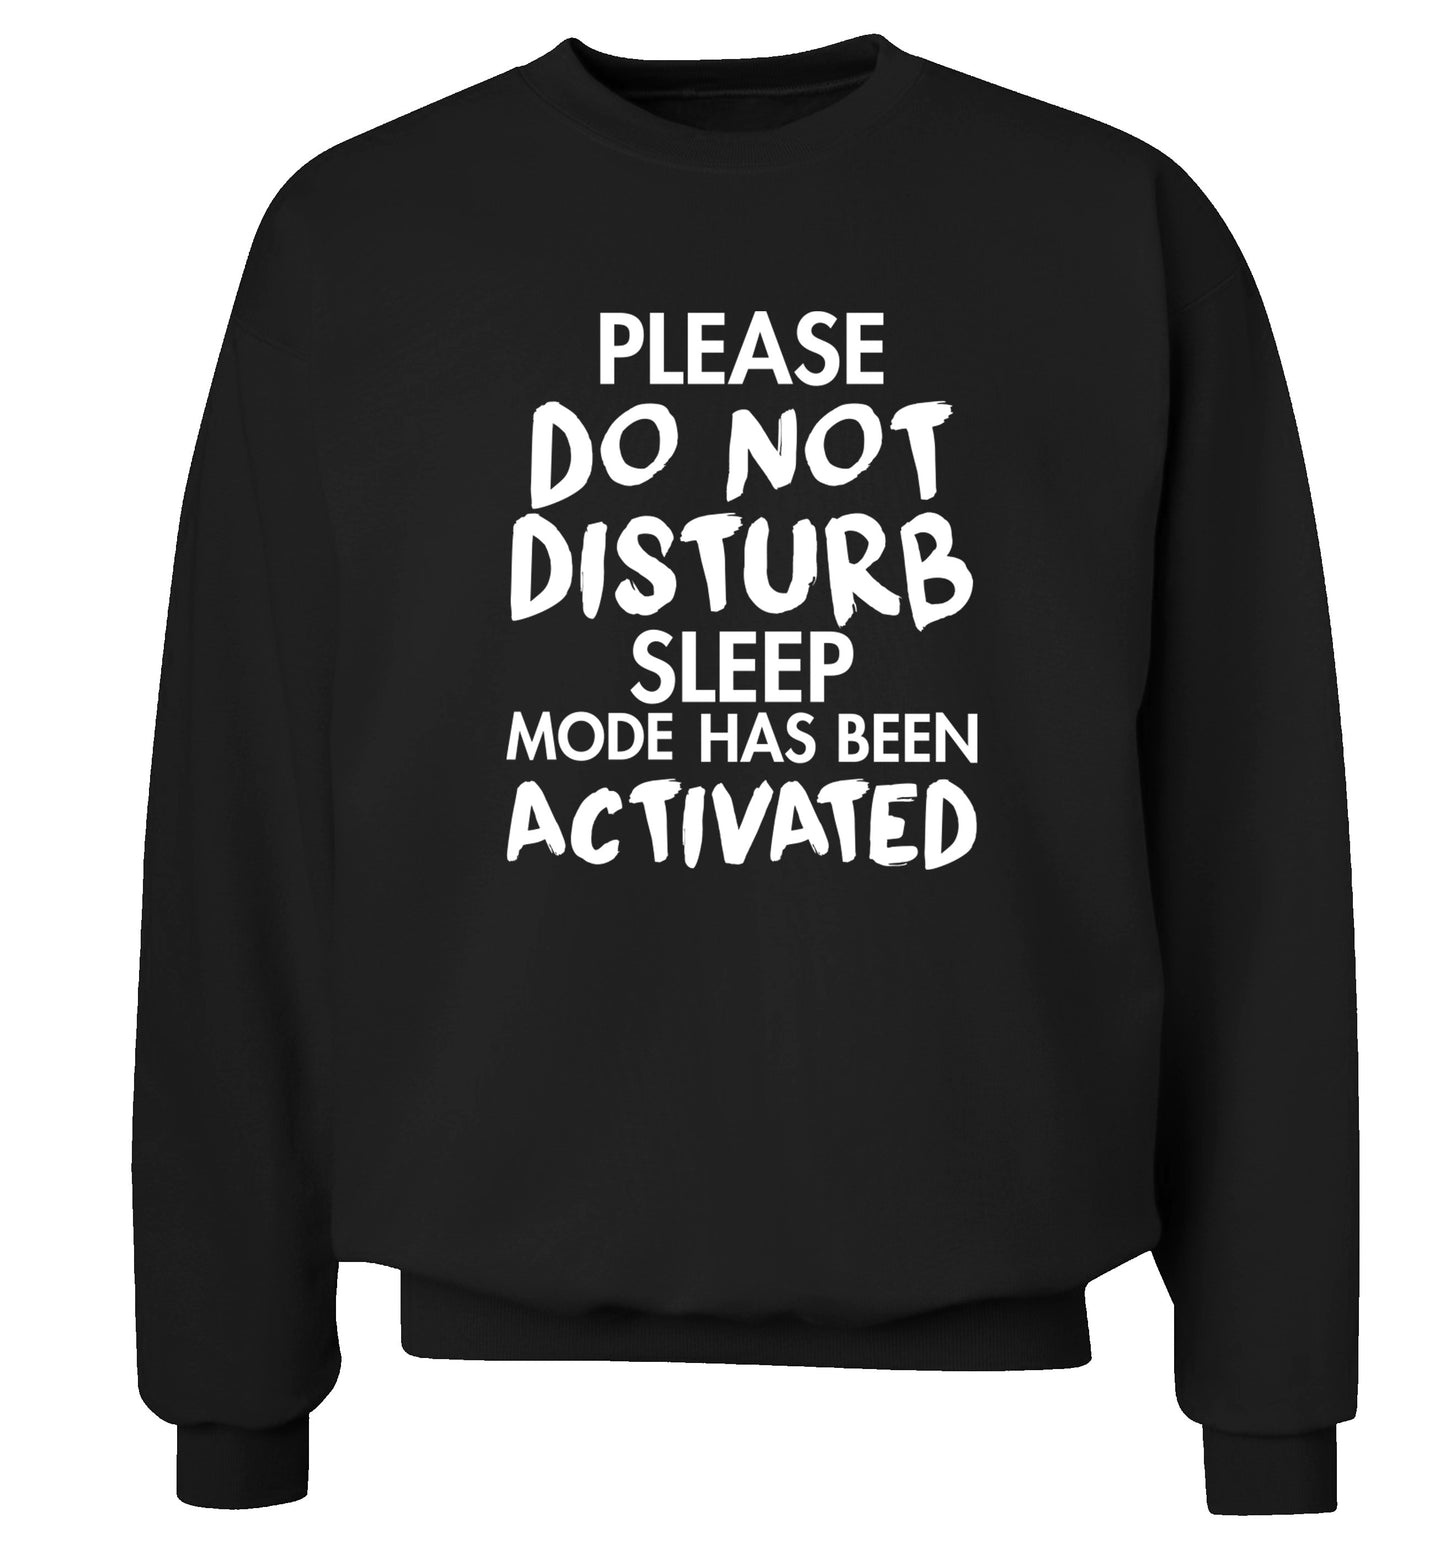 Please do not disturb sleeping mode has been activated Adult's unisex black Sweater 2XL